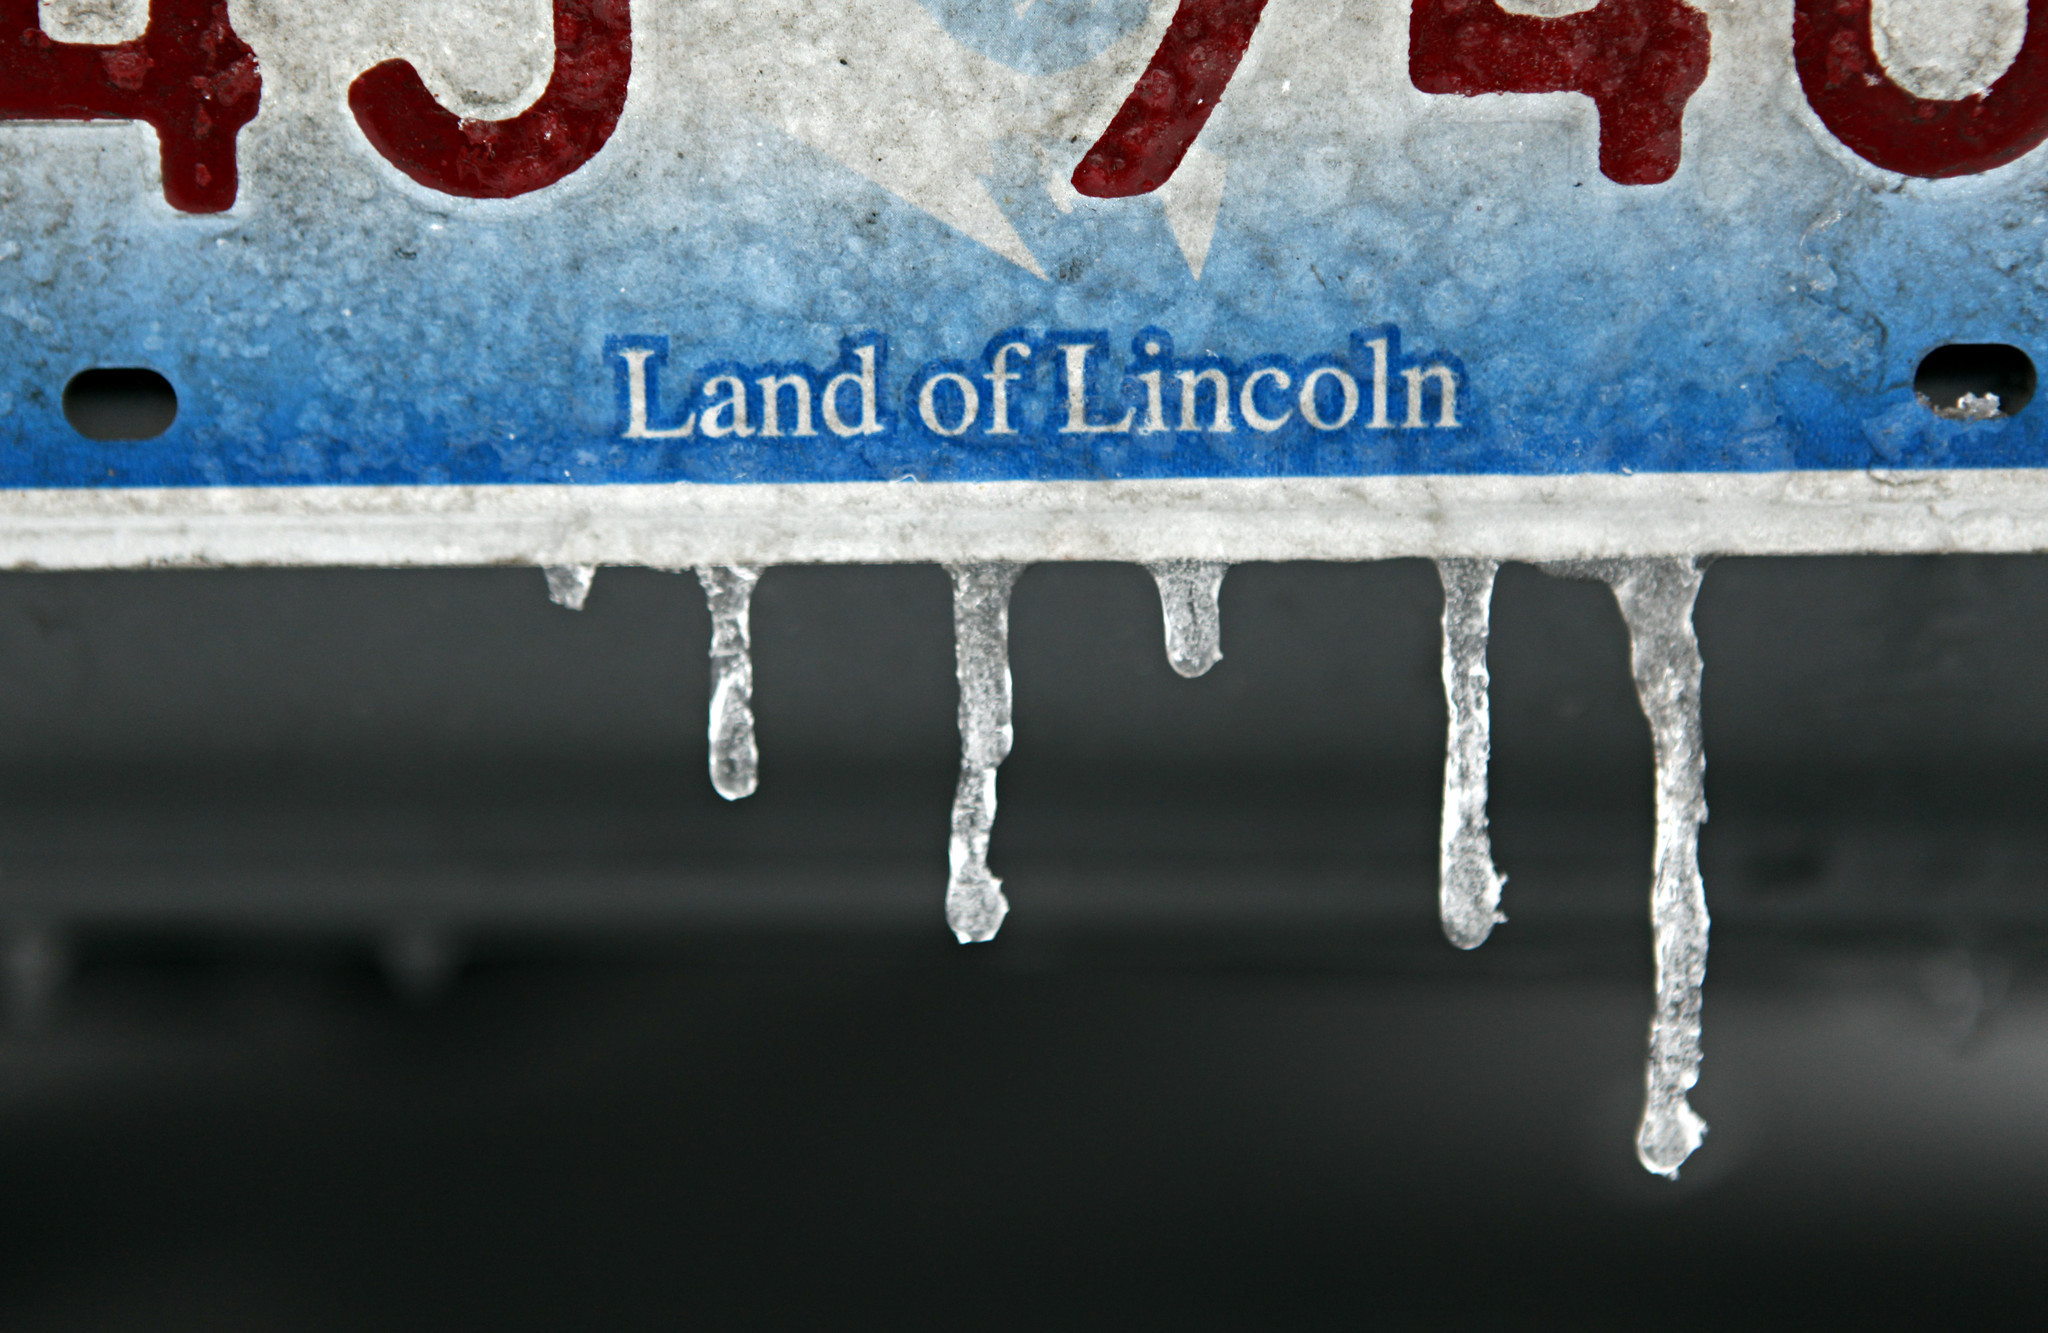 Where can you look up the owner of an Illinois license plate?